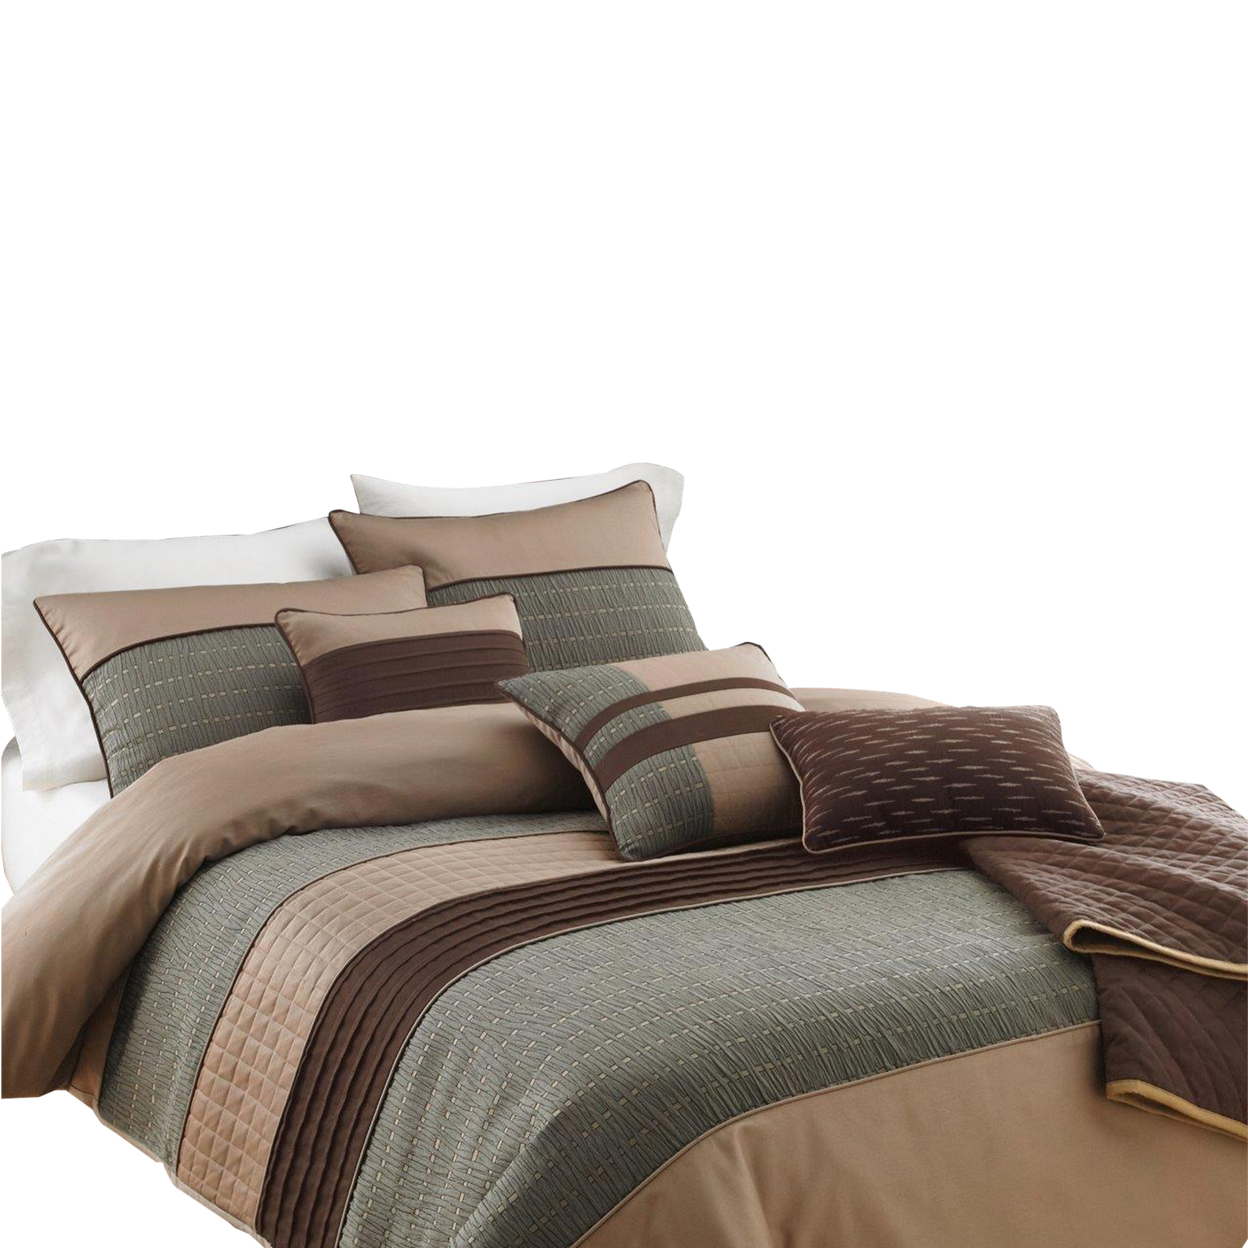 7 Piece Queen Comforter Set With Pleats And Texture, Gray And Brown- Saltoro Sherpi